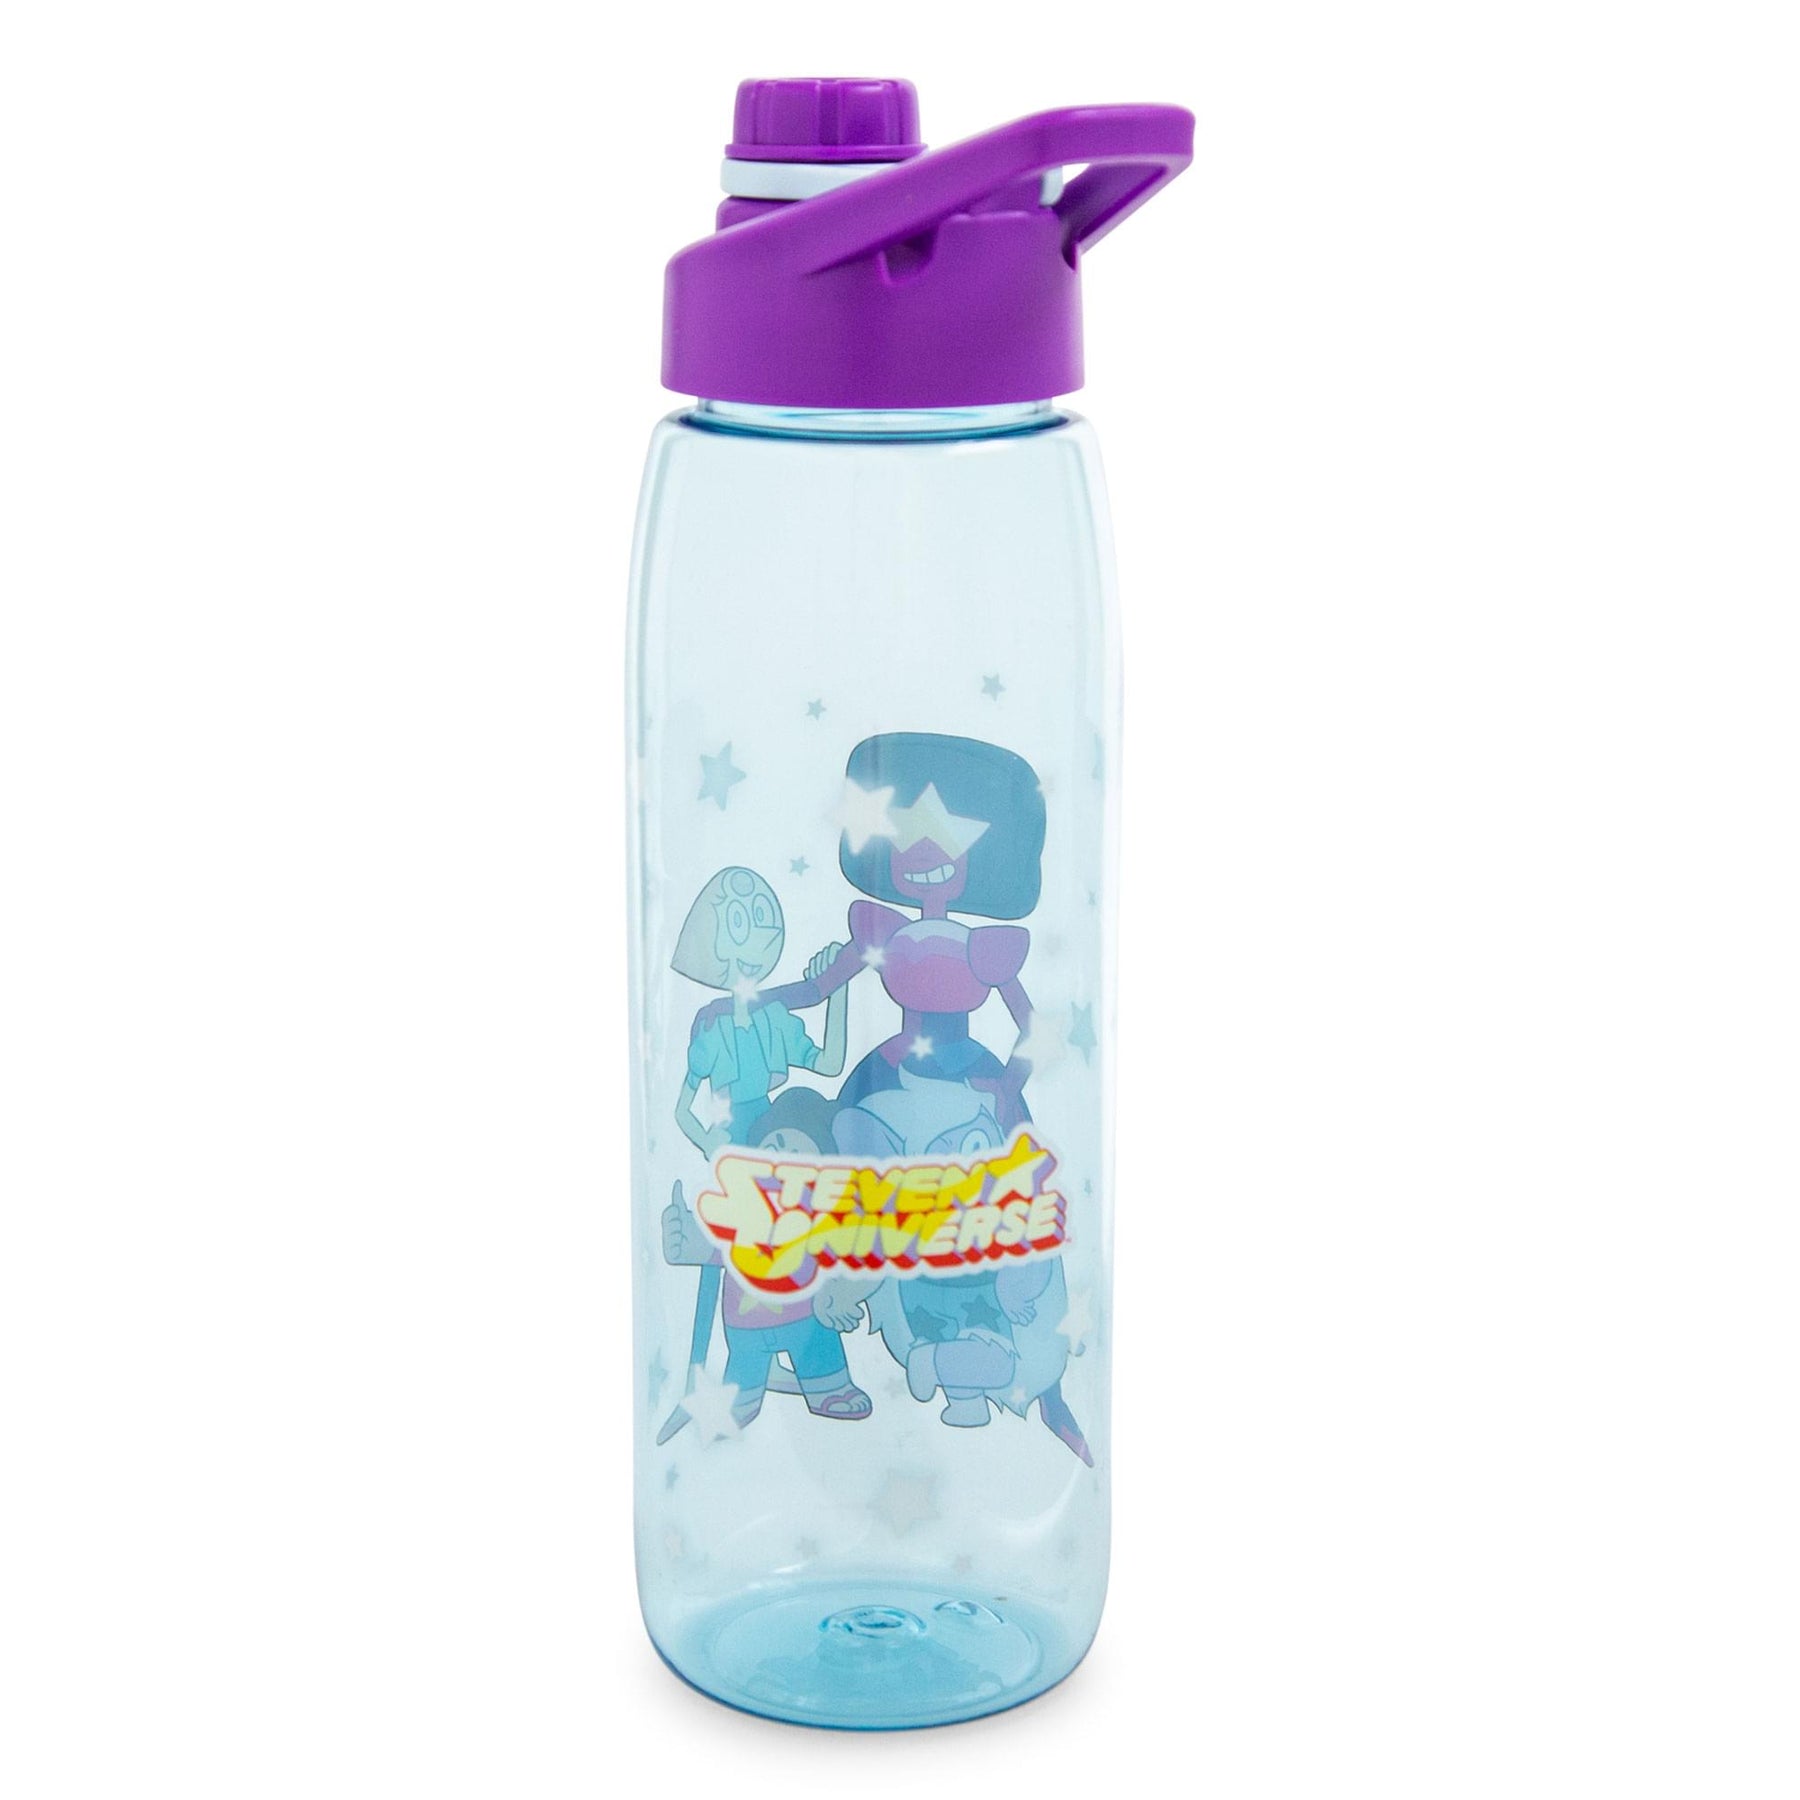 Steven Universe Characters Water Bottle With Screw-Top Lid | Holds 28 Ounces